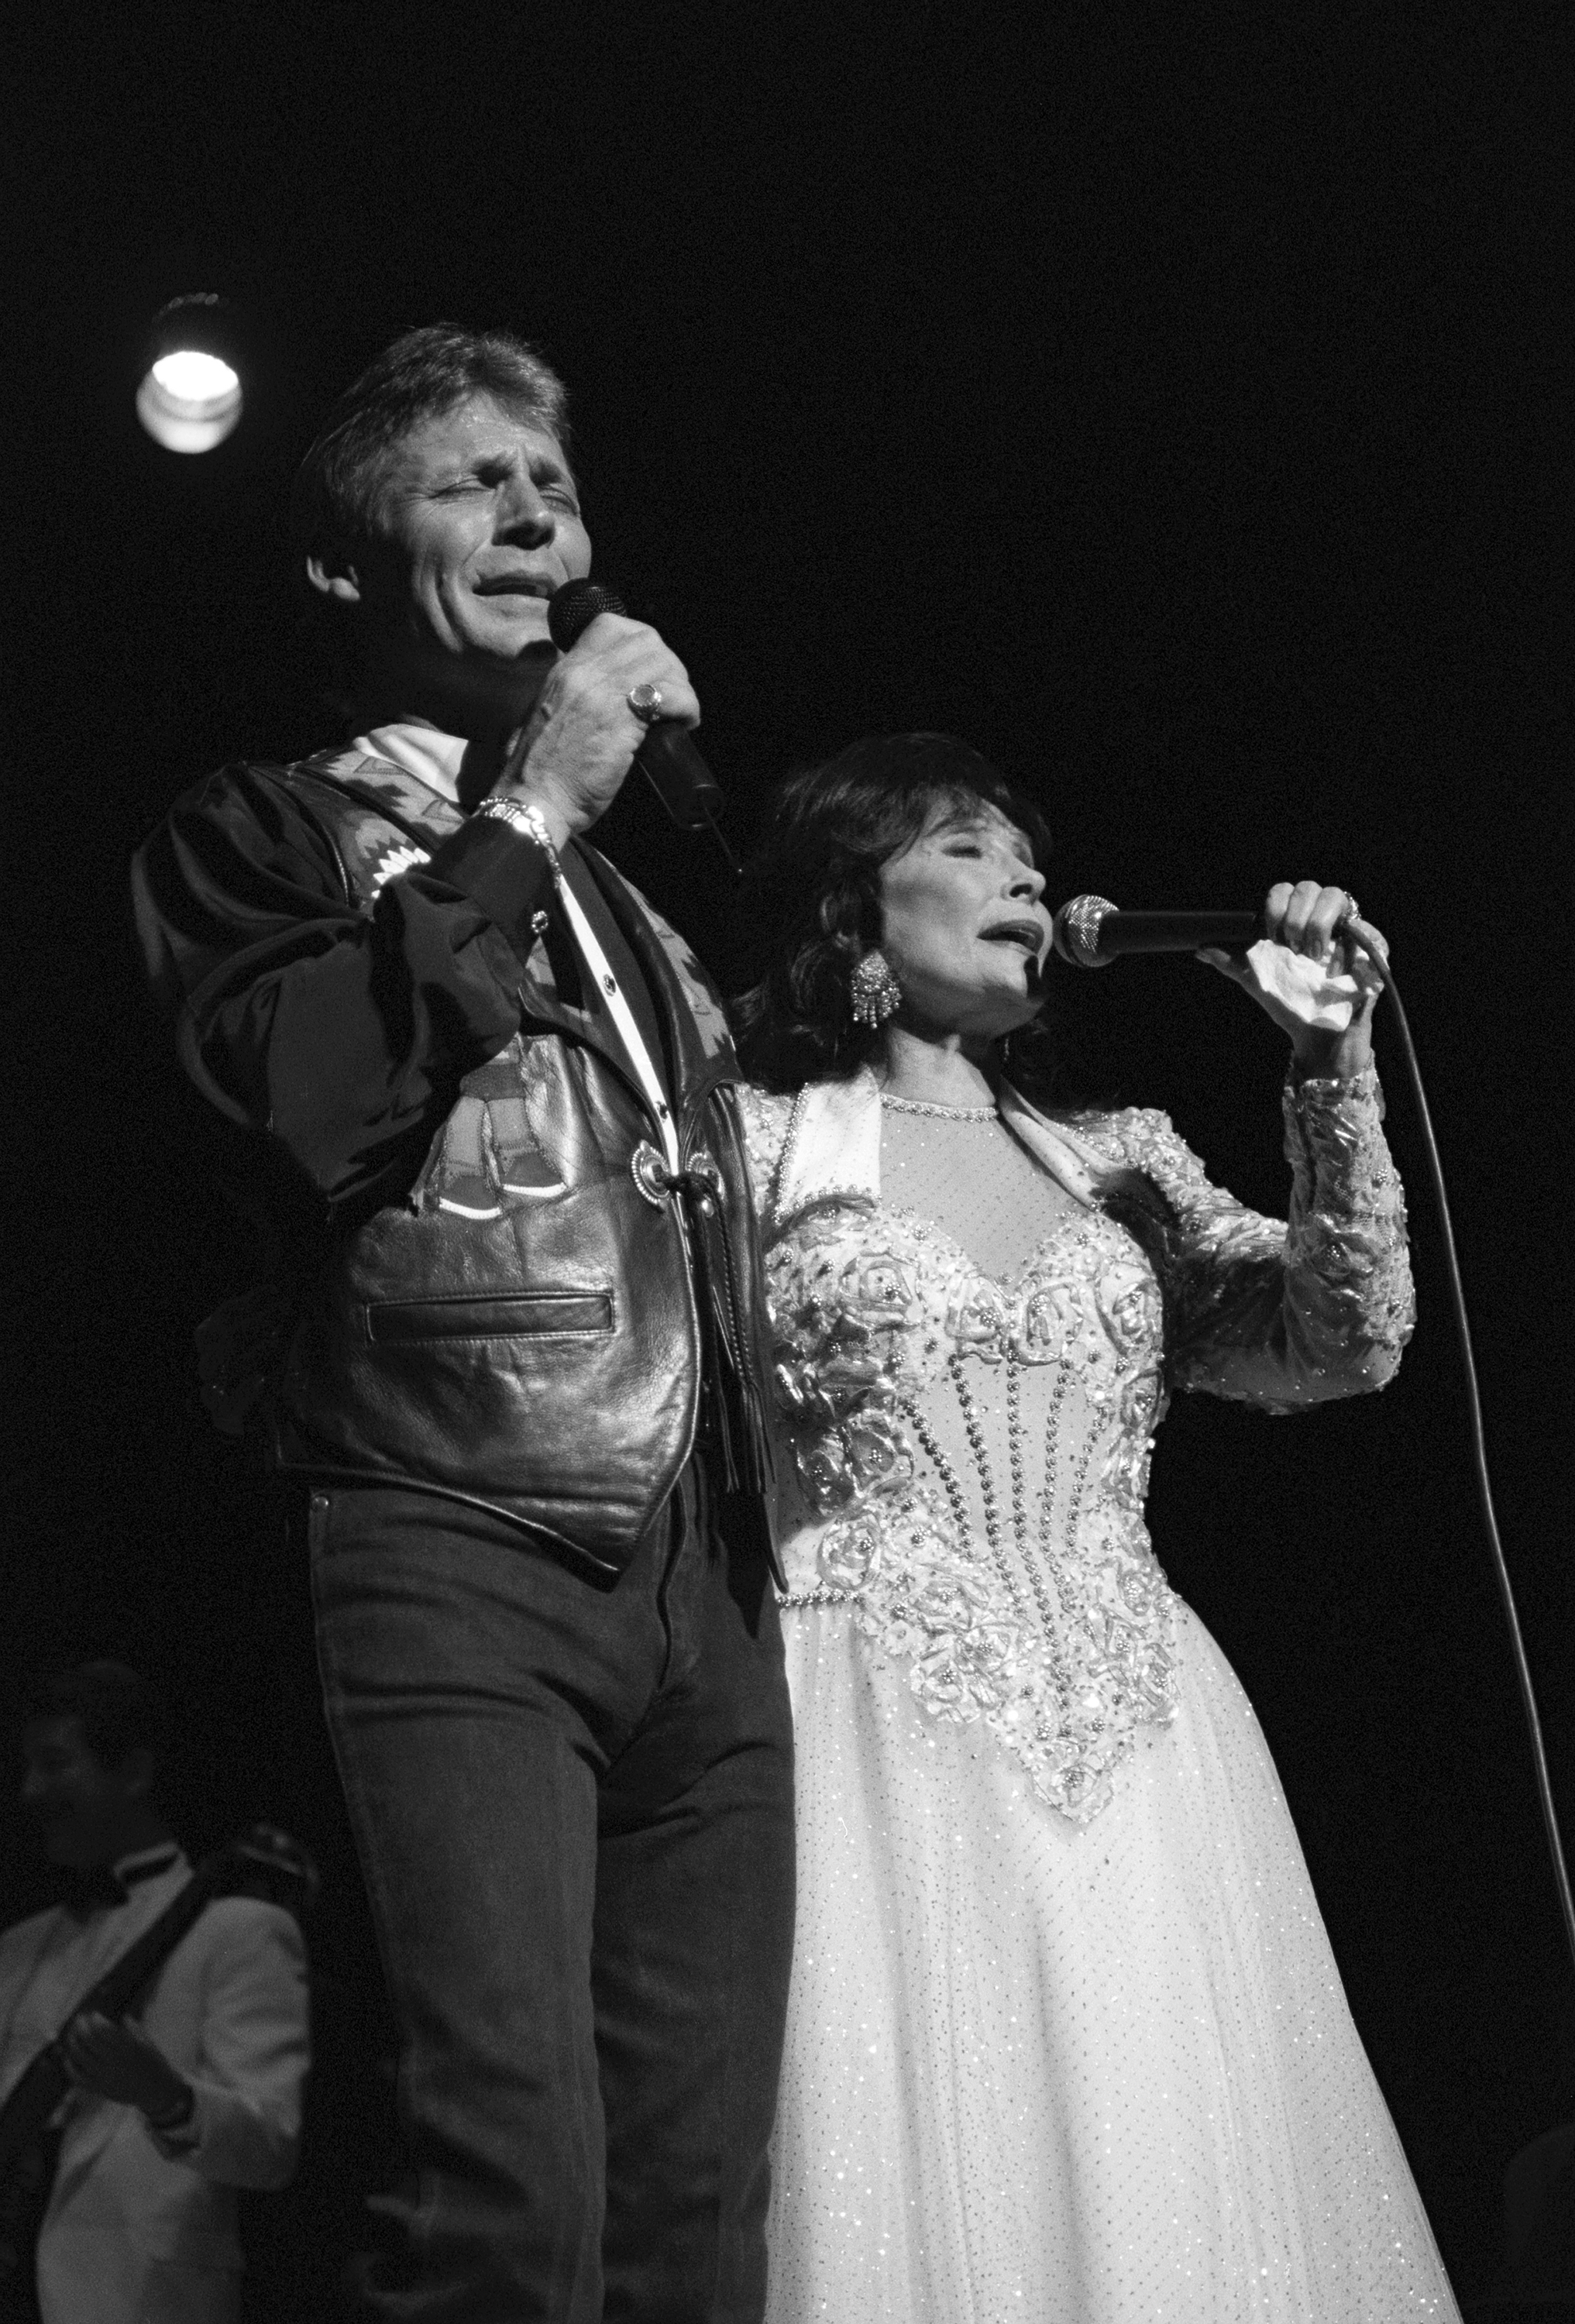 Ernest Ray Lynn and Loretta Lynn performing together at Symphony Hall in Allentown, Pennsylvania on May 12, 1999 | Source: Getty Images